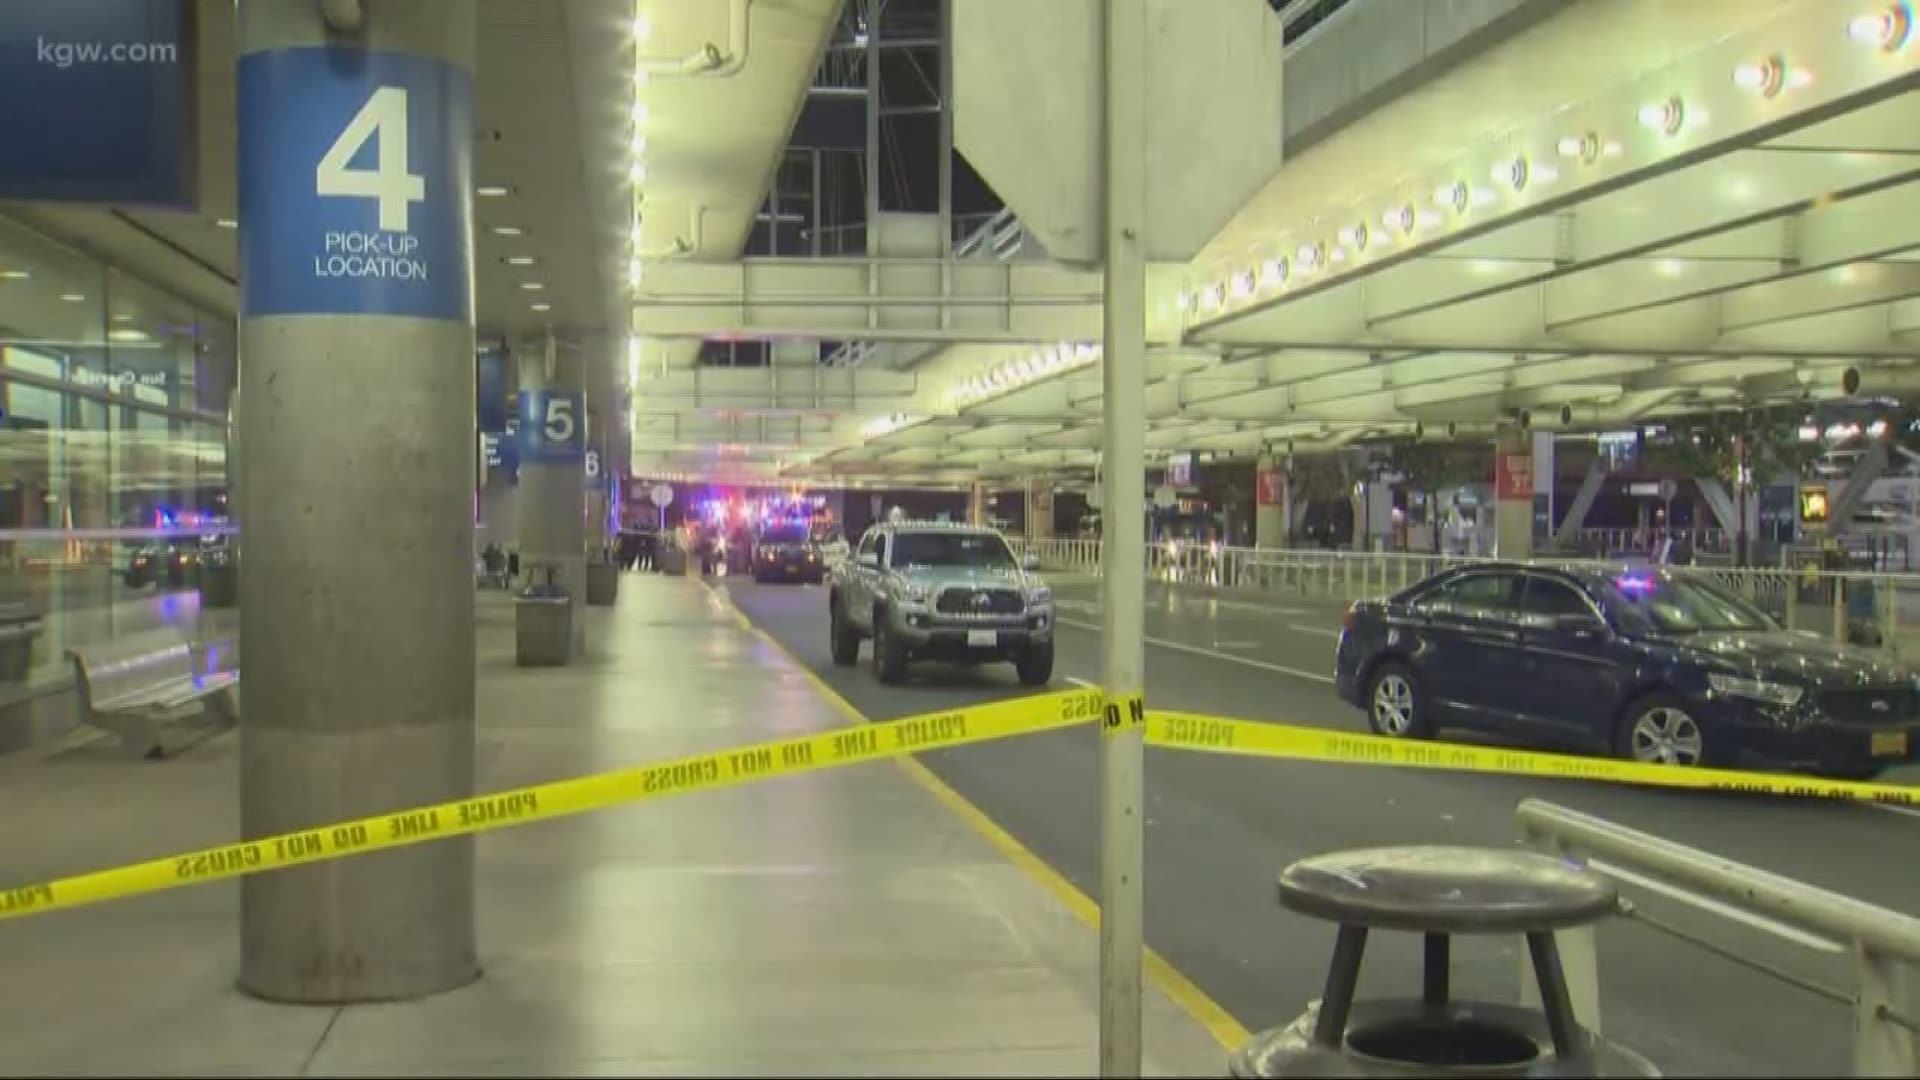 Man hospitalized after shot fired at PDX